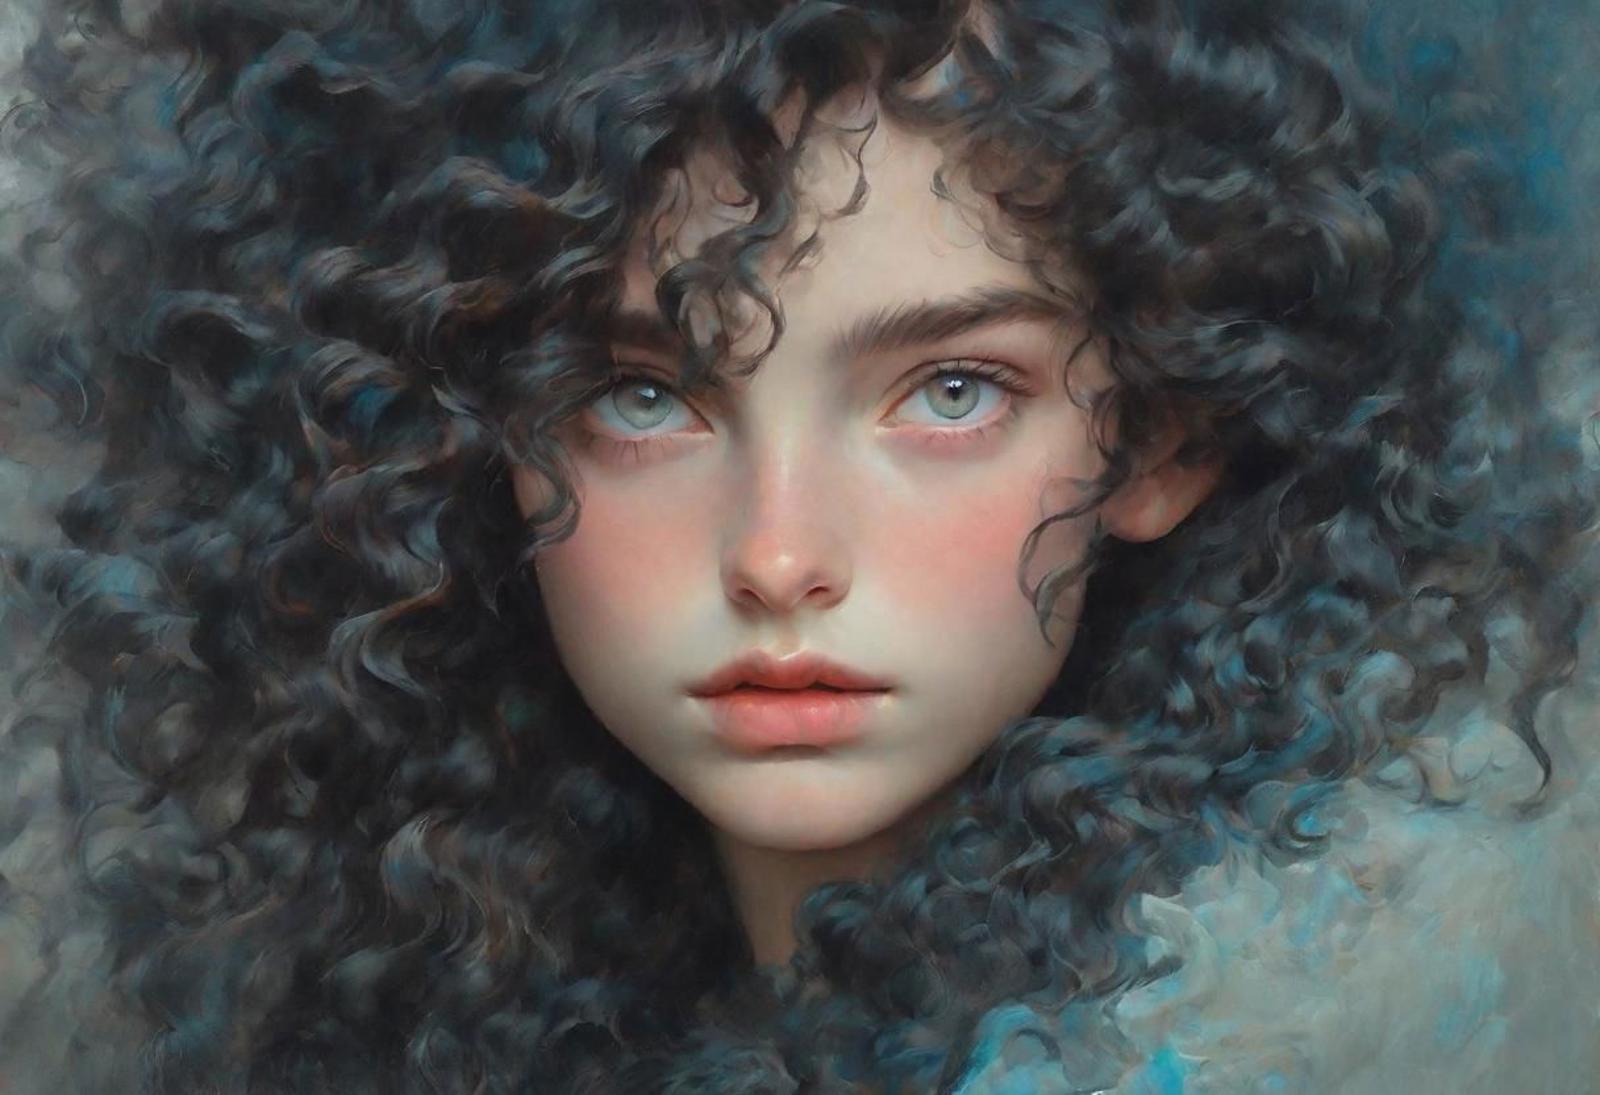 A beautiful artistic portrait of a young girl with curly hair, blue eyes and pink cheeks.